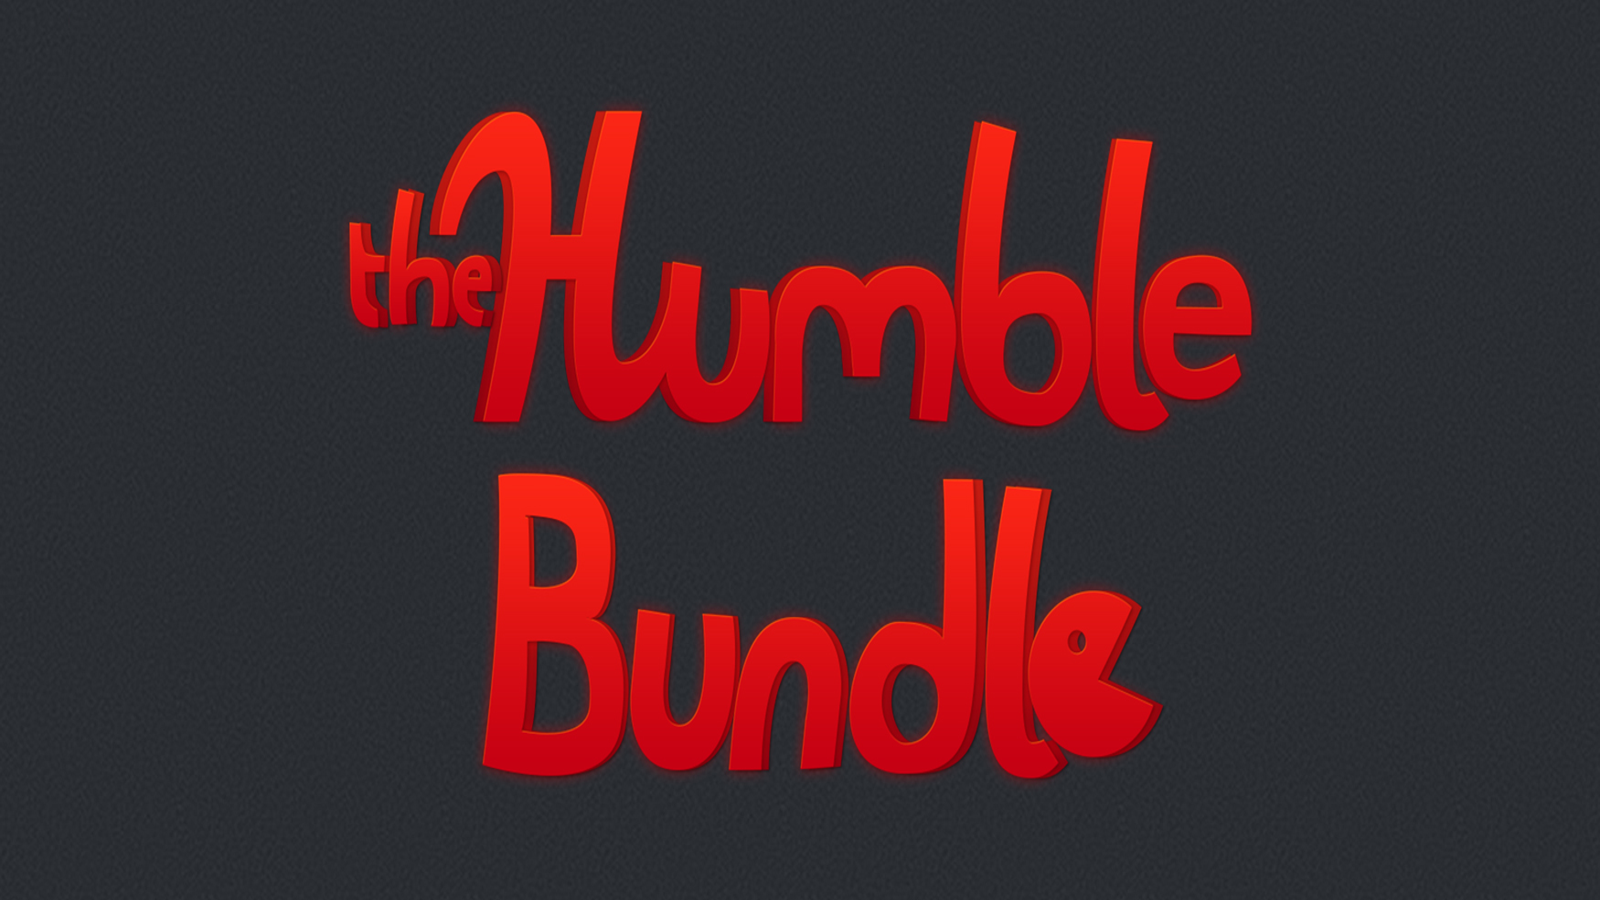 How to Buy a Humble Bundle and Redeem It on Steam